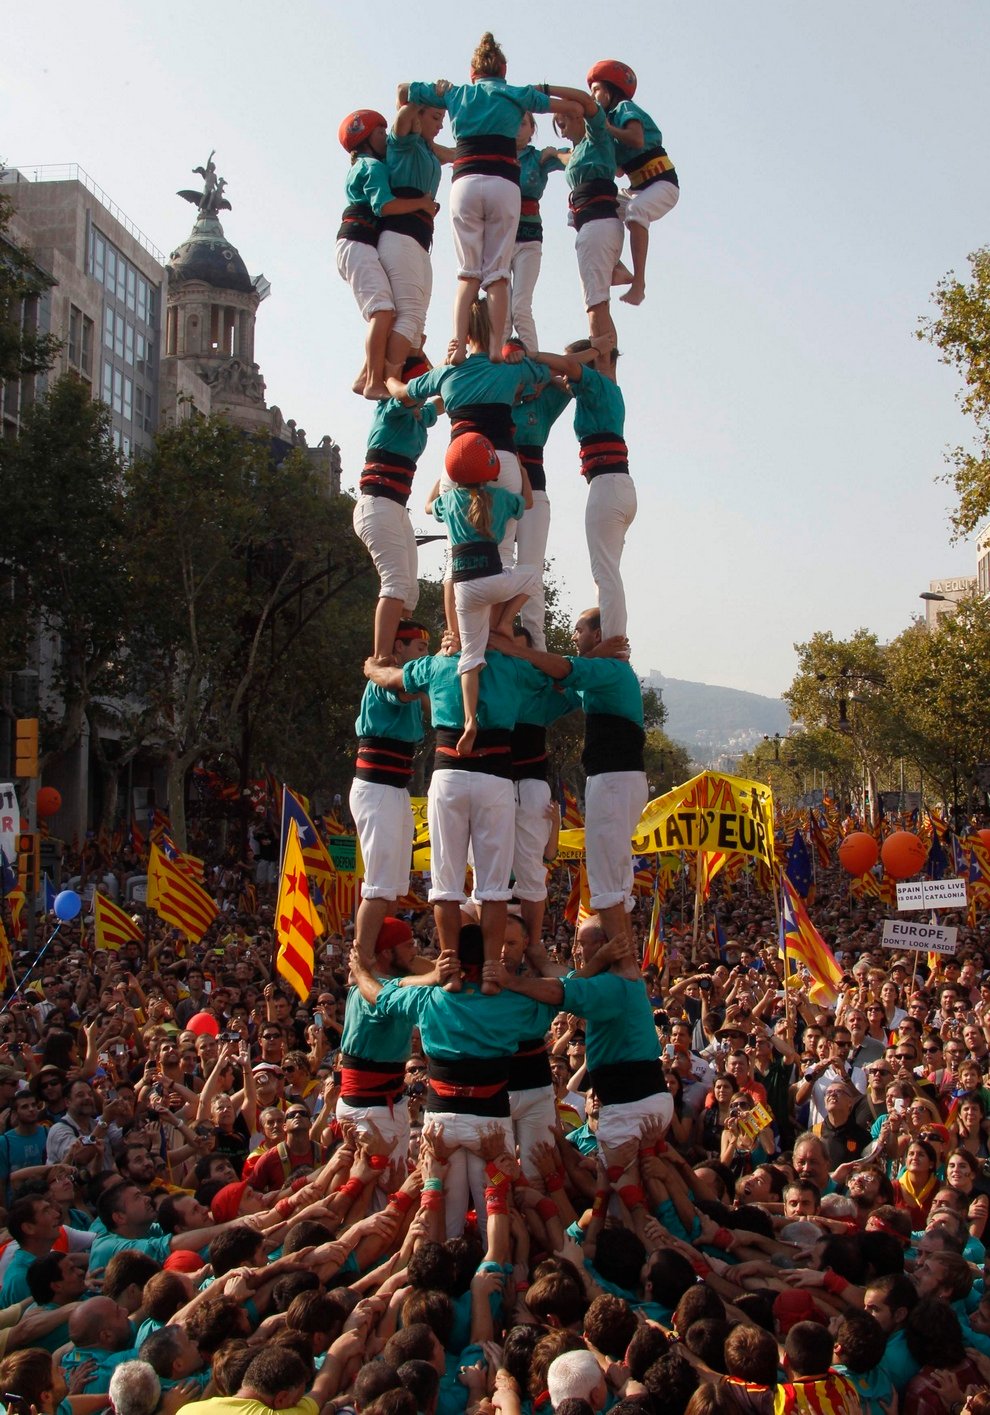 A group of Castellers form a human tower called a "Castell" during a demonstration on Catalan National Day in Barcelona